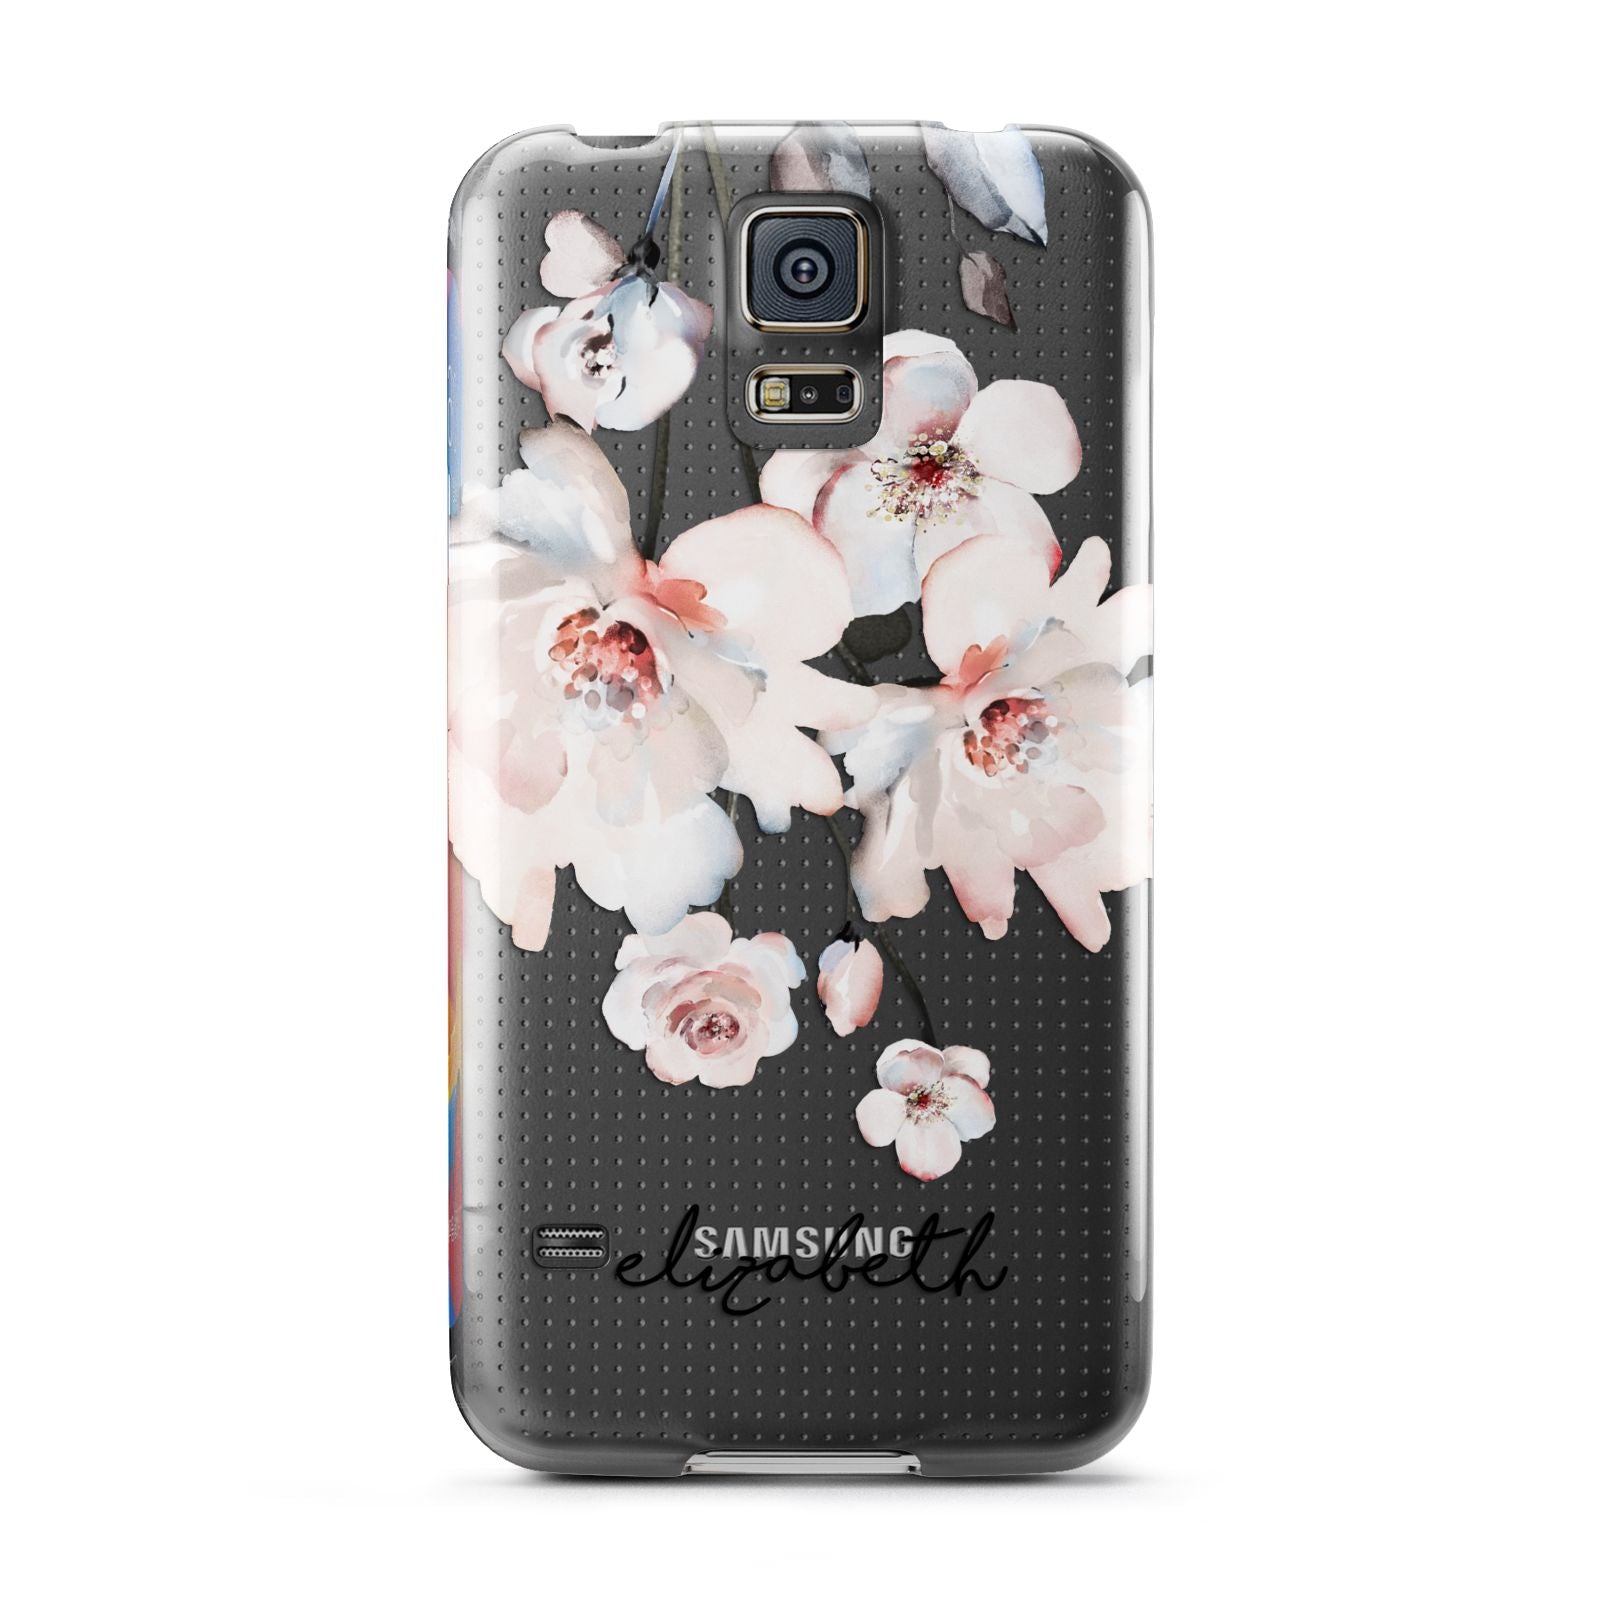 Personalised Name Roses Watercolour Samsung Galaxy S5 Case